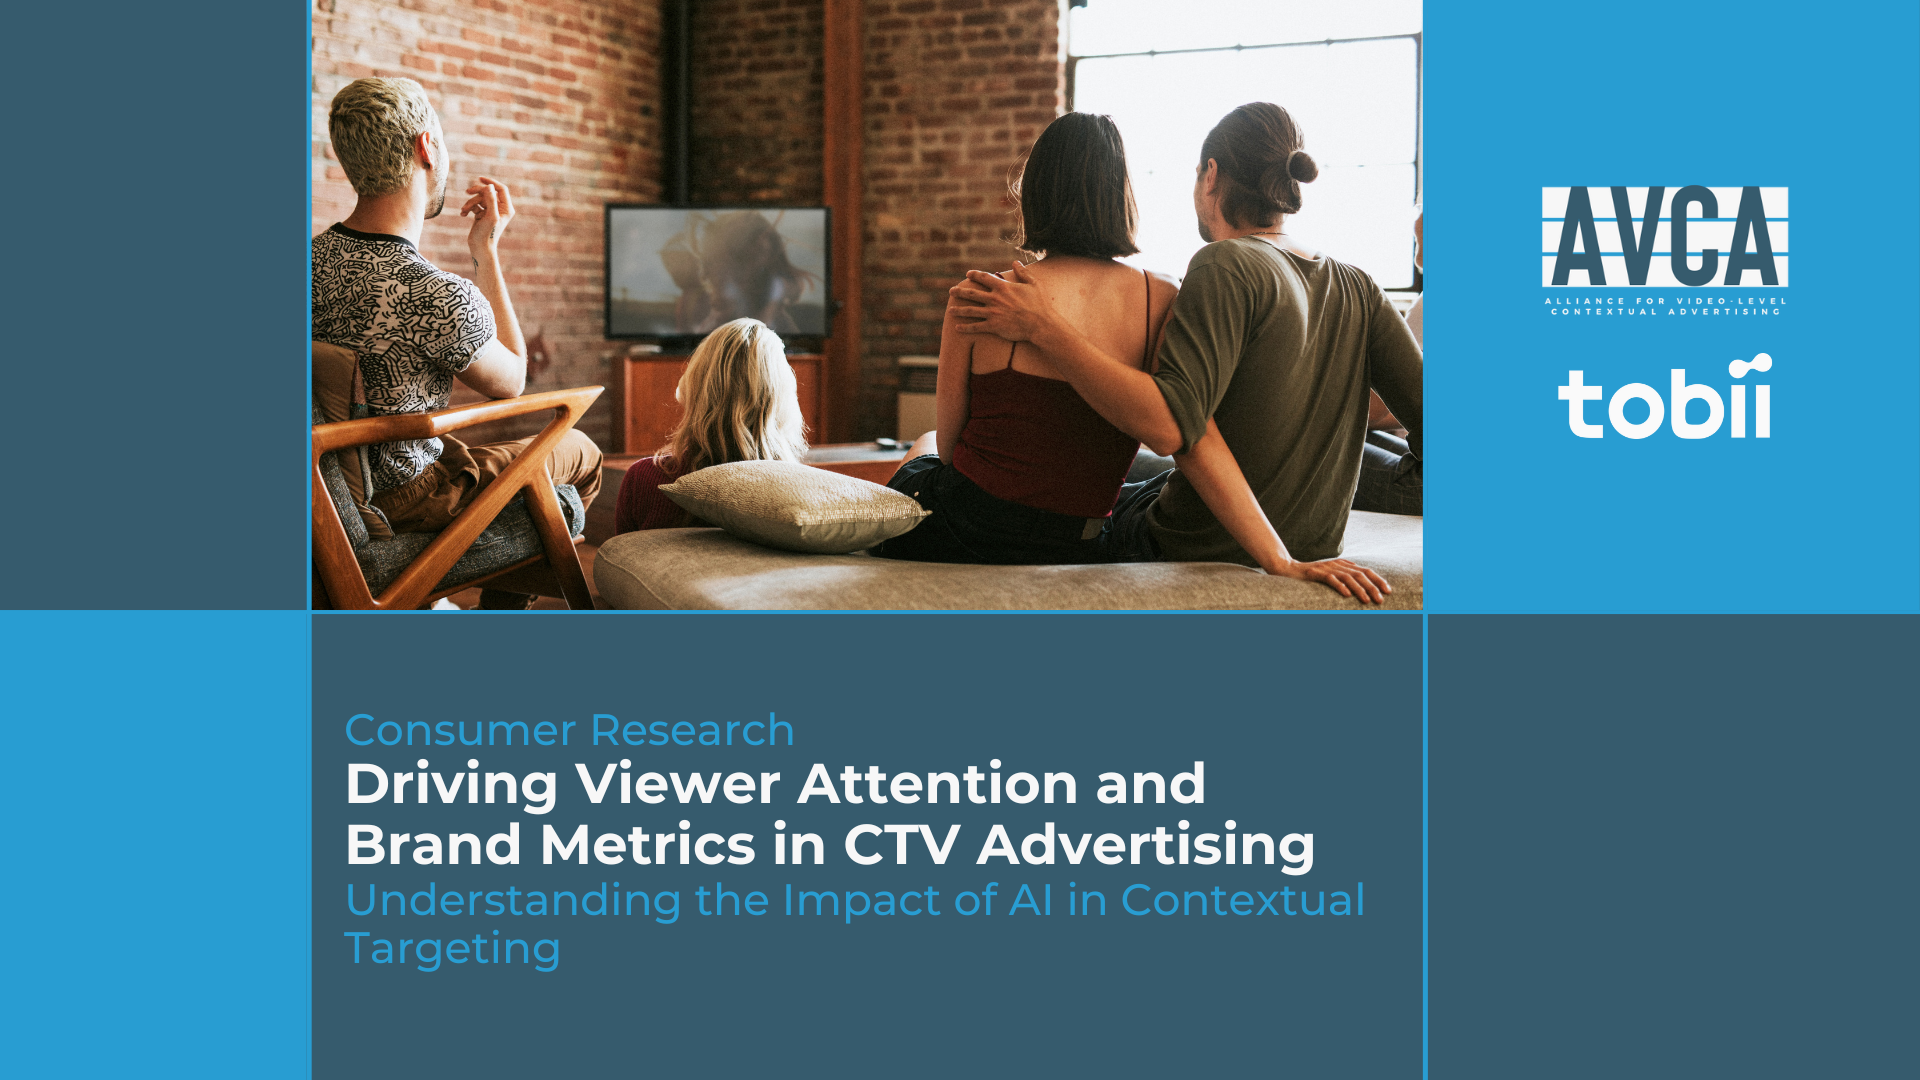 Research: Consumers Pay 4X More Attention to AI-enabled Contextually Targeted CTV Ads